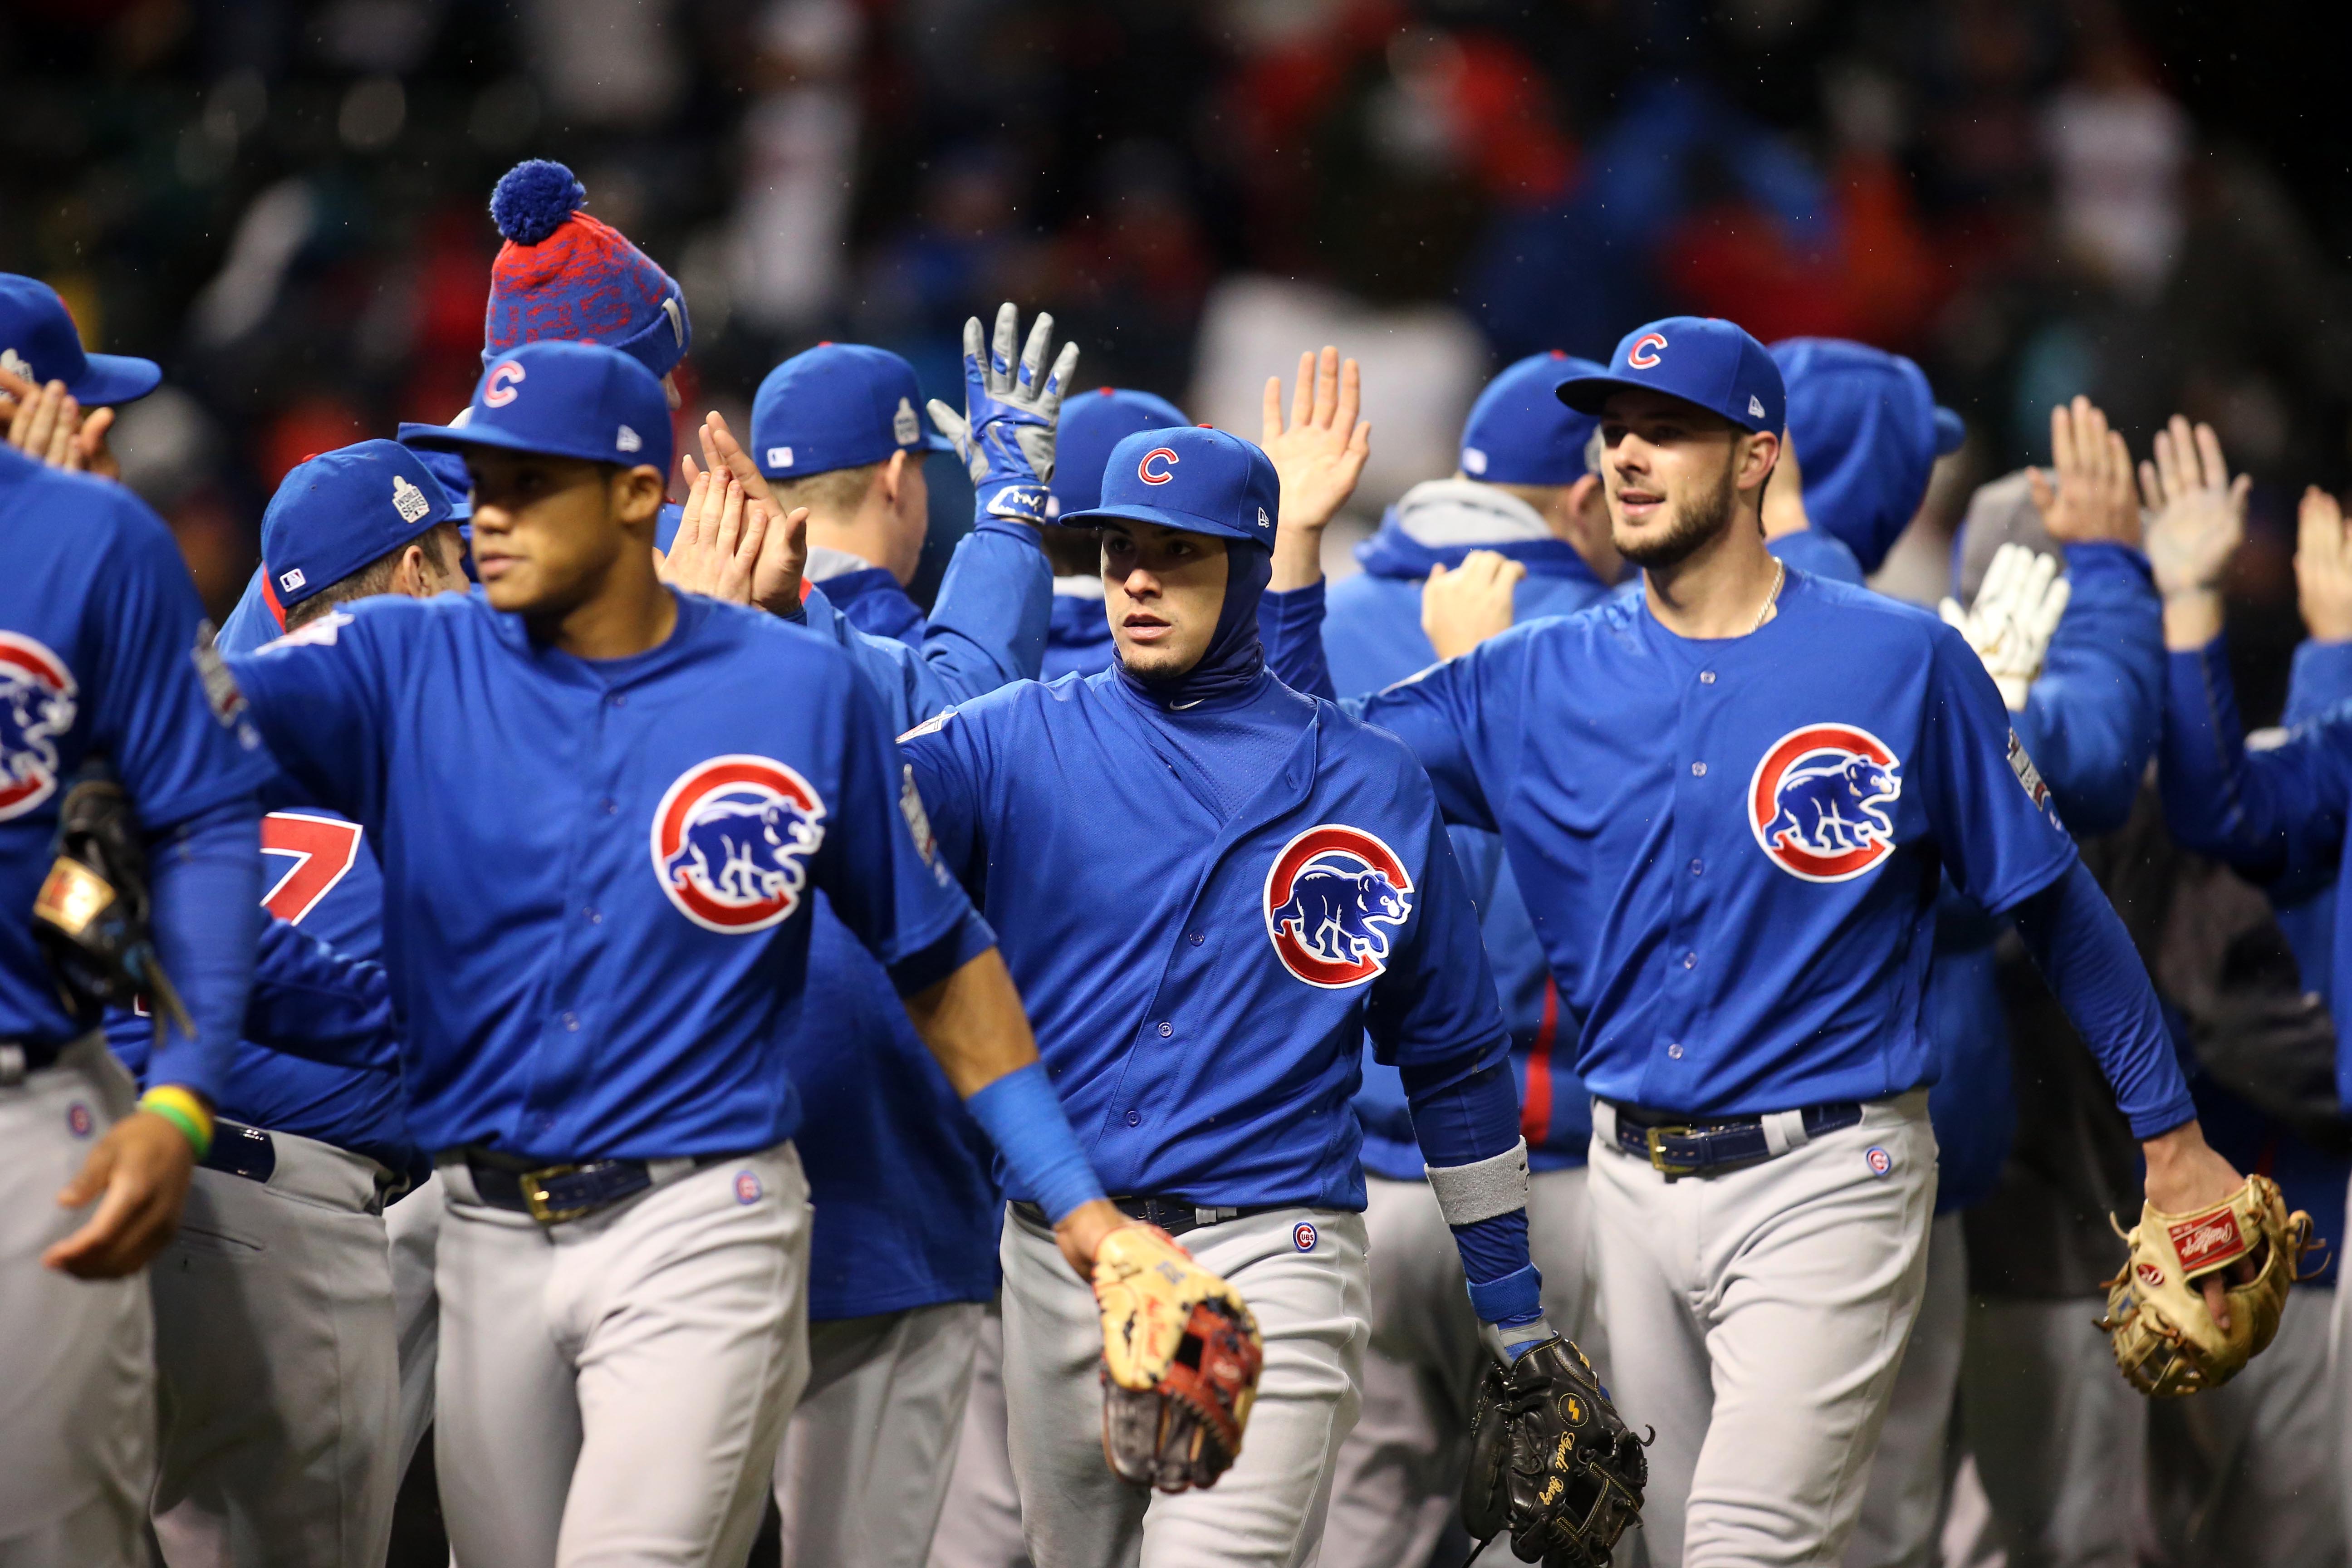 Cubs beat Indians 5-1 to tie up World Series